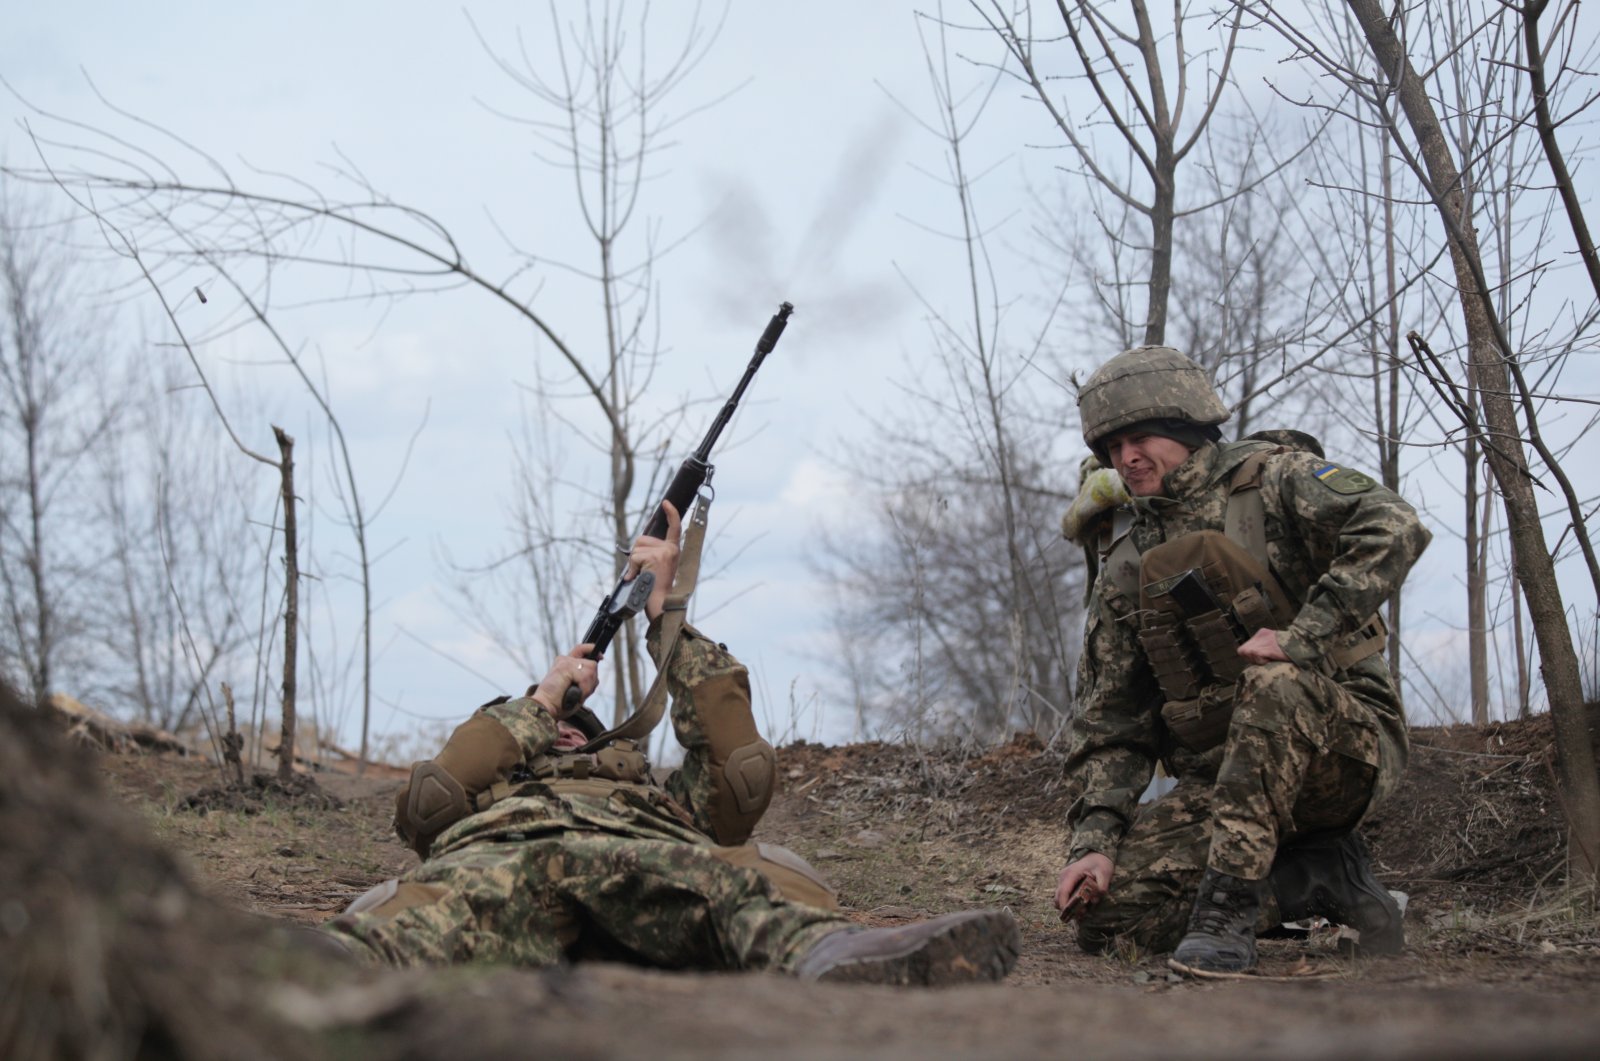 Service members of the Ukrainian armed forces on the line of separation near the rebel-controlled city of Donetsk, Ukraine, April 9, 2021. (Reuters Photo)